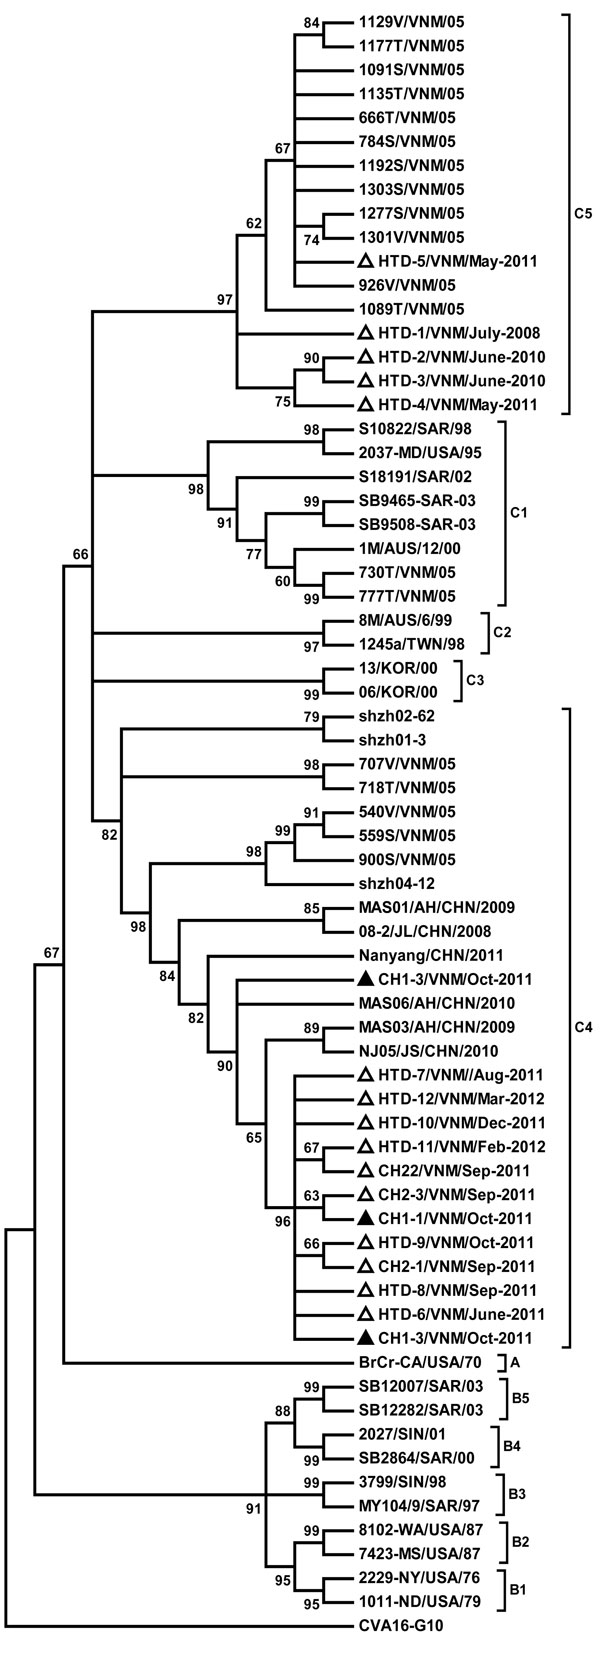 Phylogenetic tree of enterovirus 71 viral protein 1 constructed by MEGA4 (www.megasoftware.net) with neighbor-joining method showing the relationship of 18 local sequences from 2010 and 2011 (triangles). Sequence names consist of the following information: the hospital at which the sample was obtained (HTD, Hospital for Tropical Diseases; CH1, Children’s Hospital 1; CH2, Children’s Hospital 2 (all from Ho Chi Minh City, Vietnam]); number in chronologic order/VNM for Vietnam/date (month-year). Re